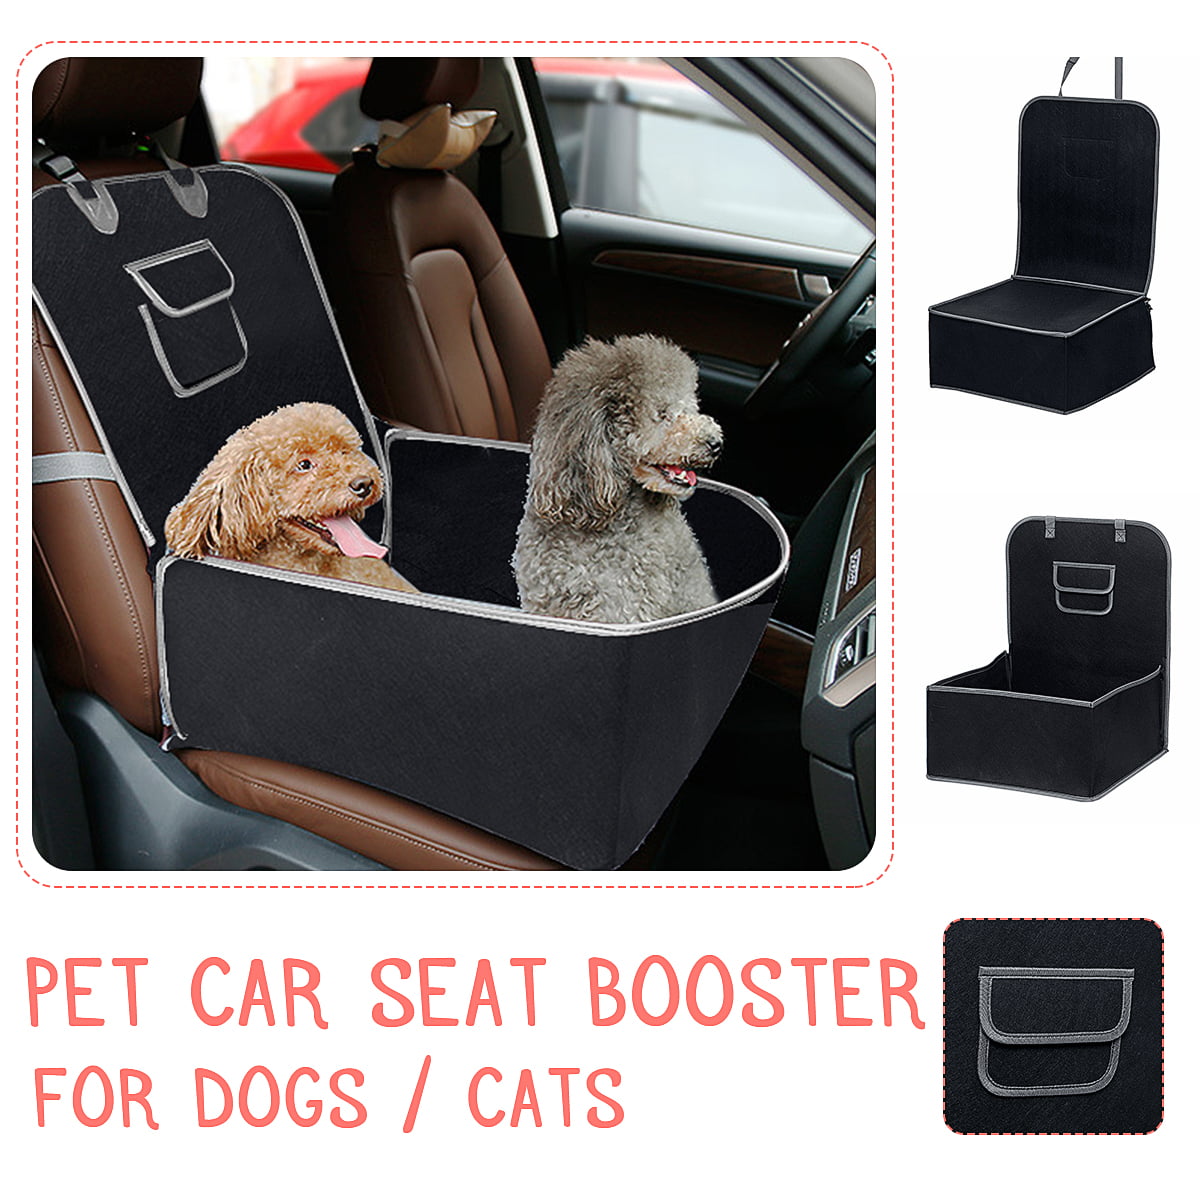 Dog Car Seat,Pet Car Booster Seat Waterproof Supplies Travel Carrier Bag Seat Protector Cover with Safety Leash Oxford Breathable for Small Dogs Cats or Other Small Pet Black